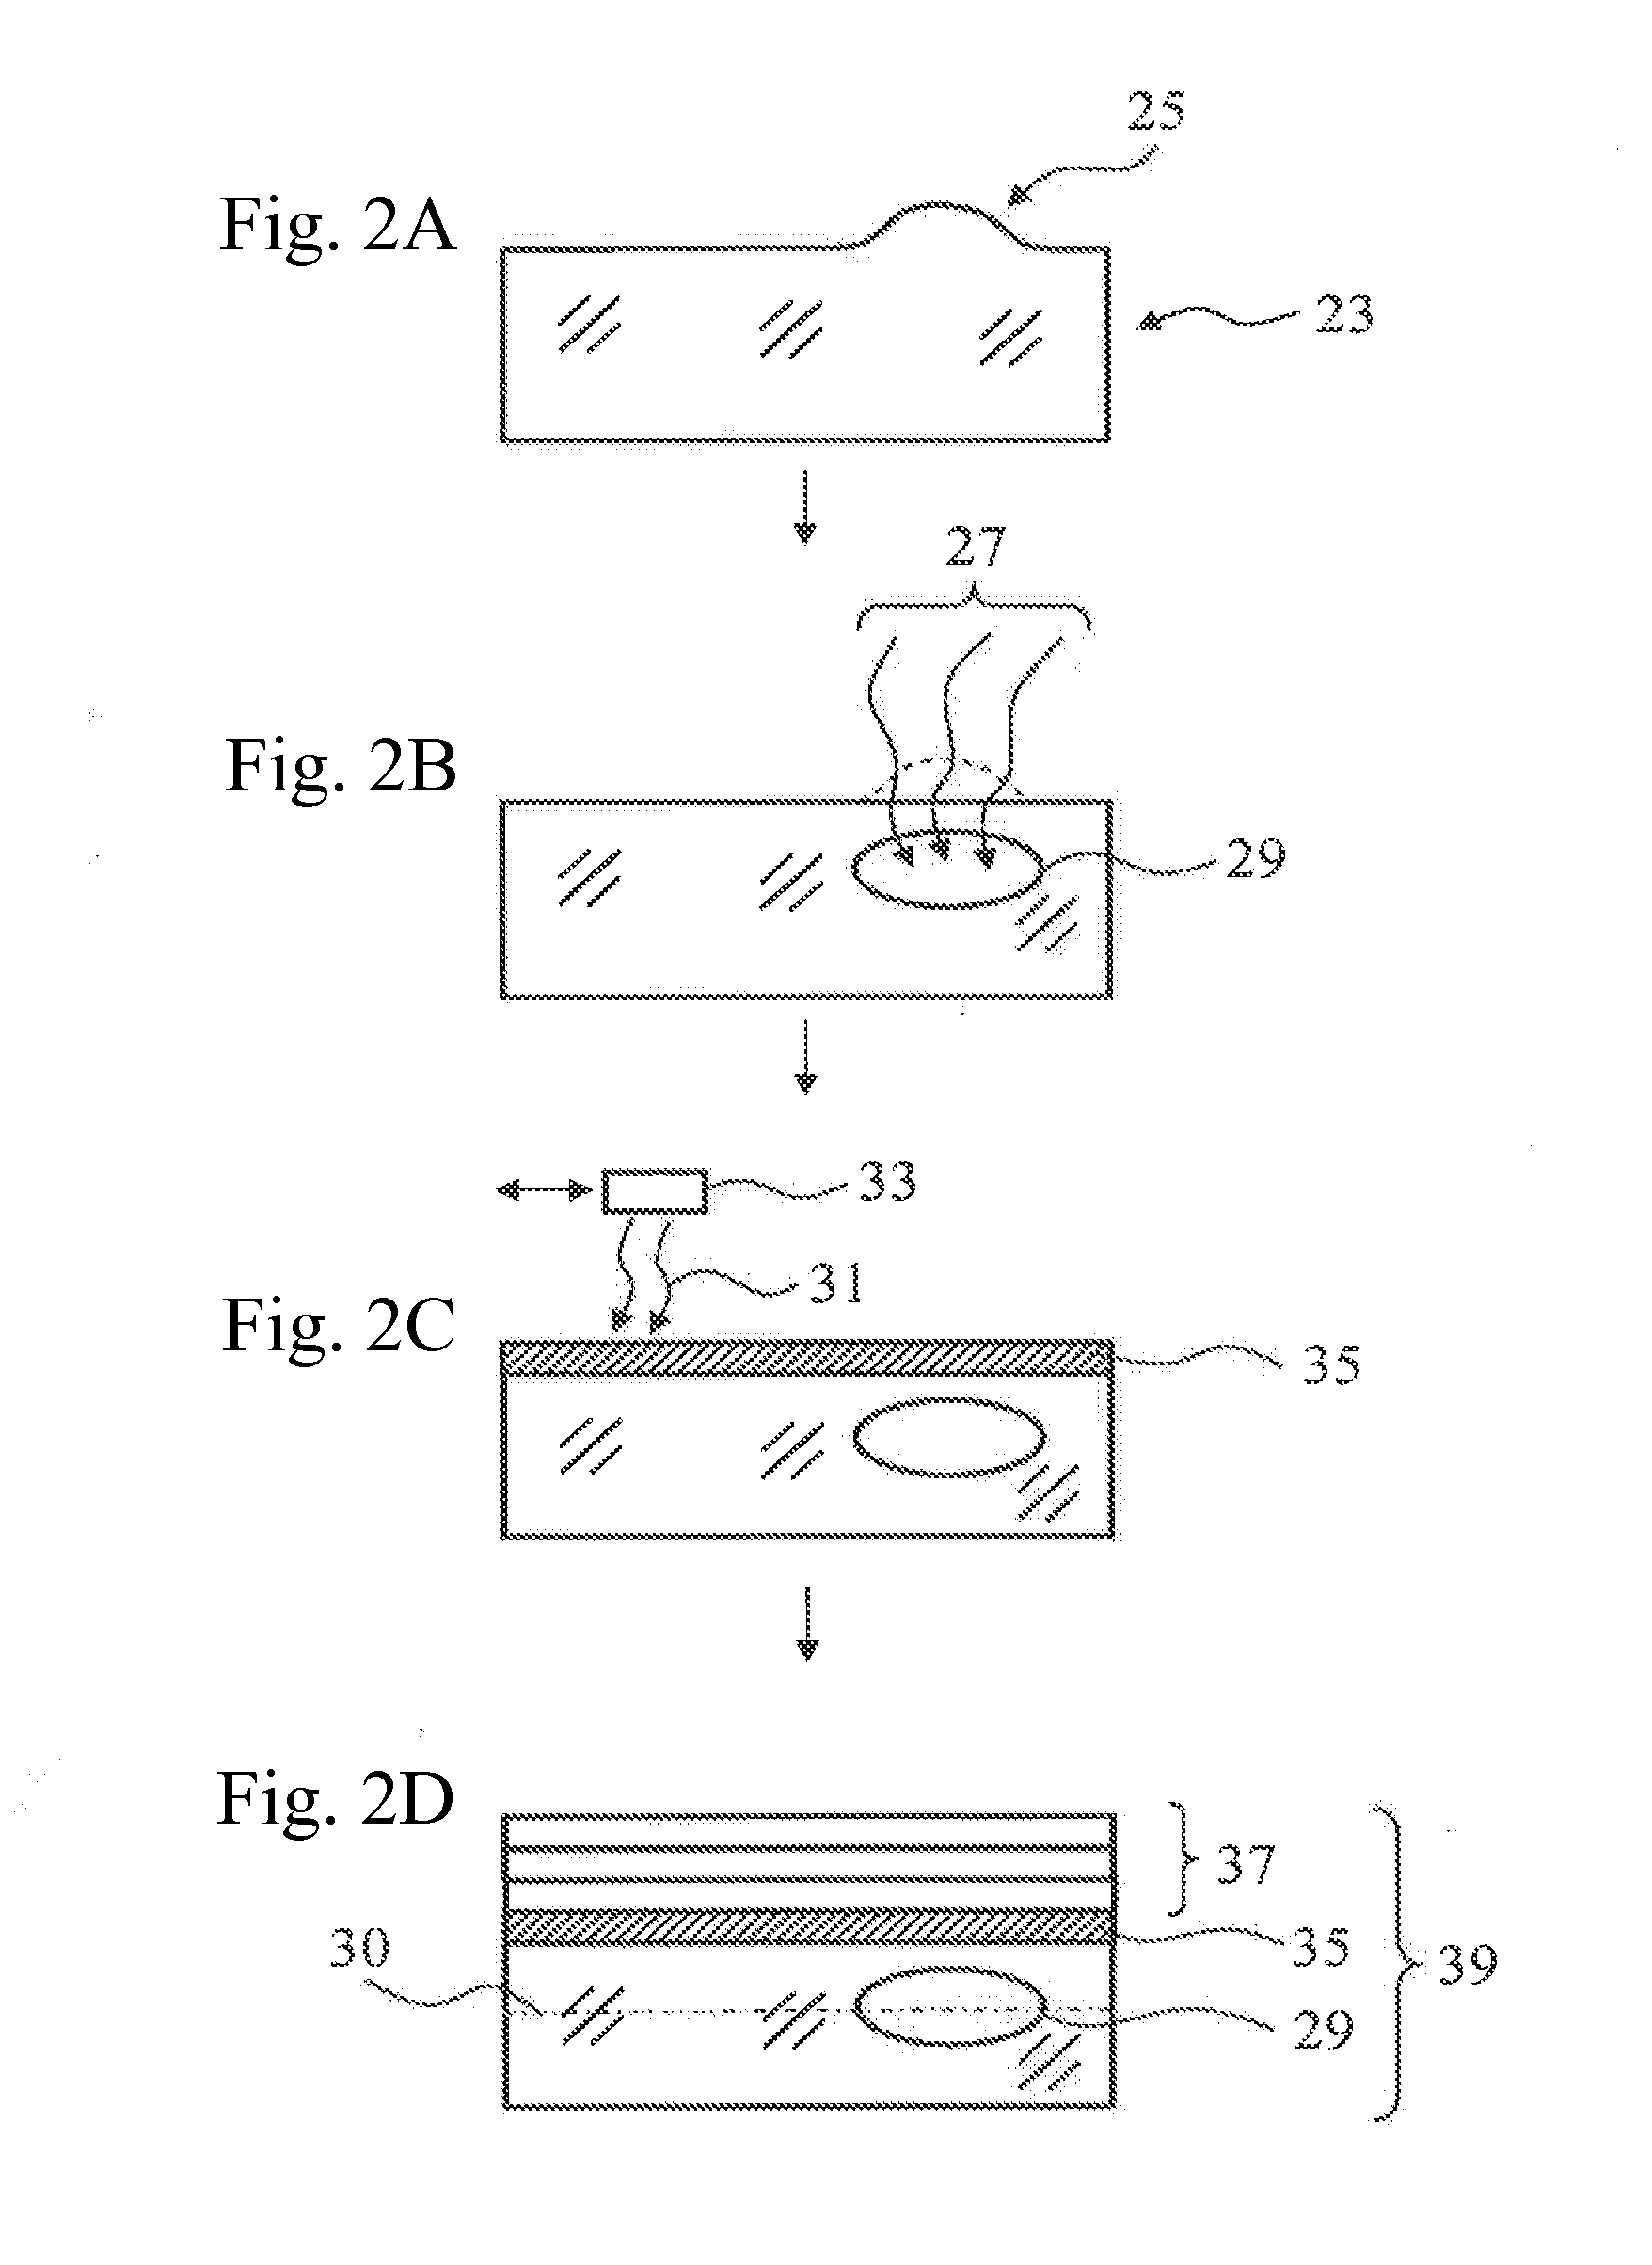 Reflective Optical Element for the EUV Wavelength Range, Method for Producing and for Correcting Such an Element, Projection Lens for Microlithography Comprising Such an Element, and Projection Exposure Apparatus for Microlithography Comprising Such a Projection Lens